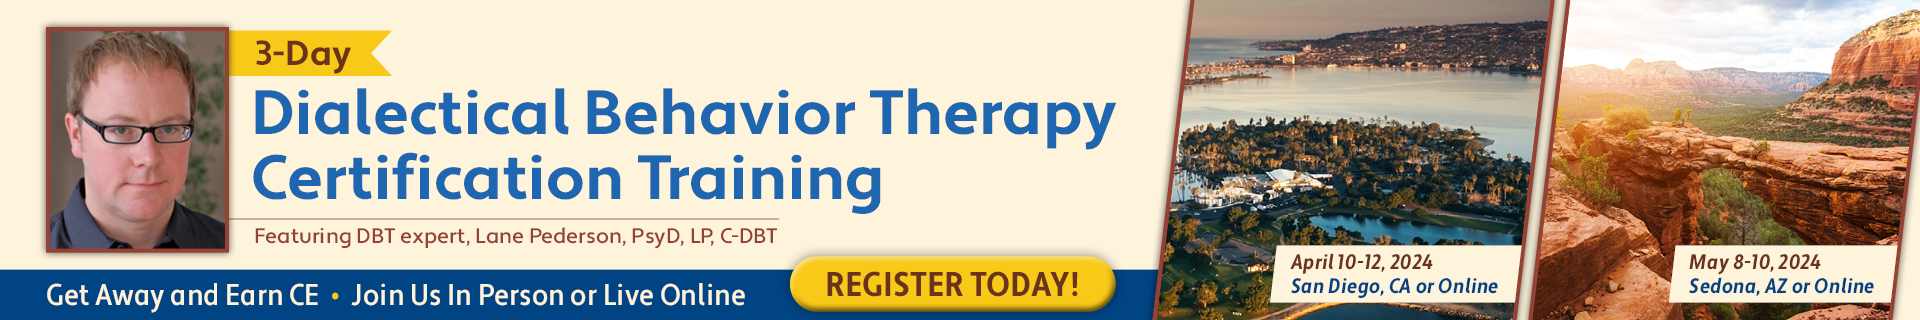 Dialectical Behavior Therapy Certification Training